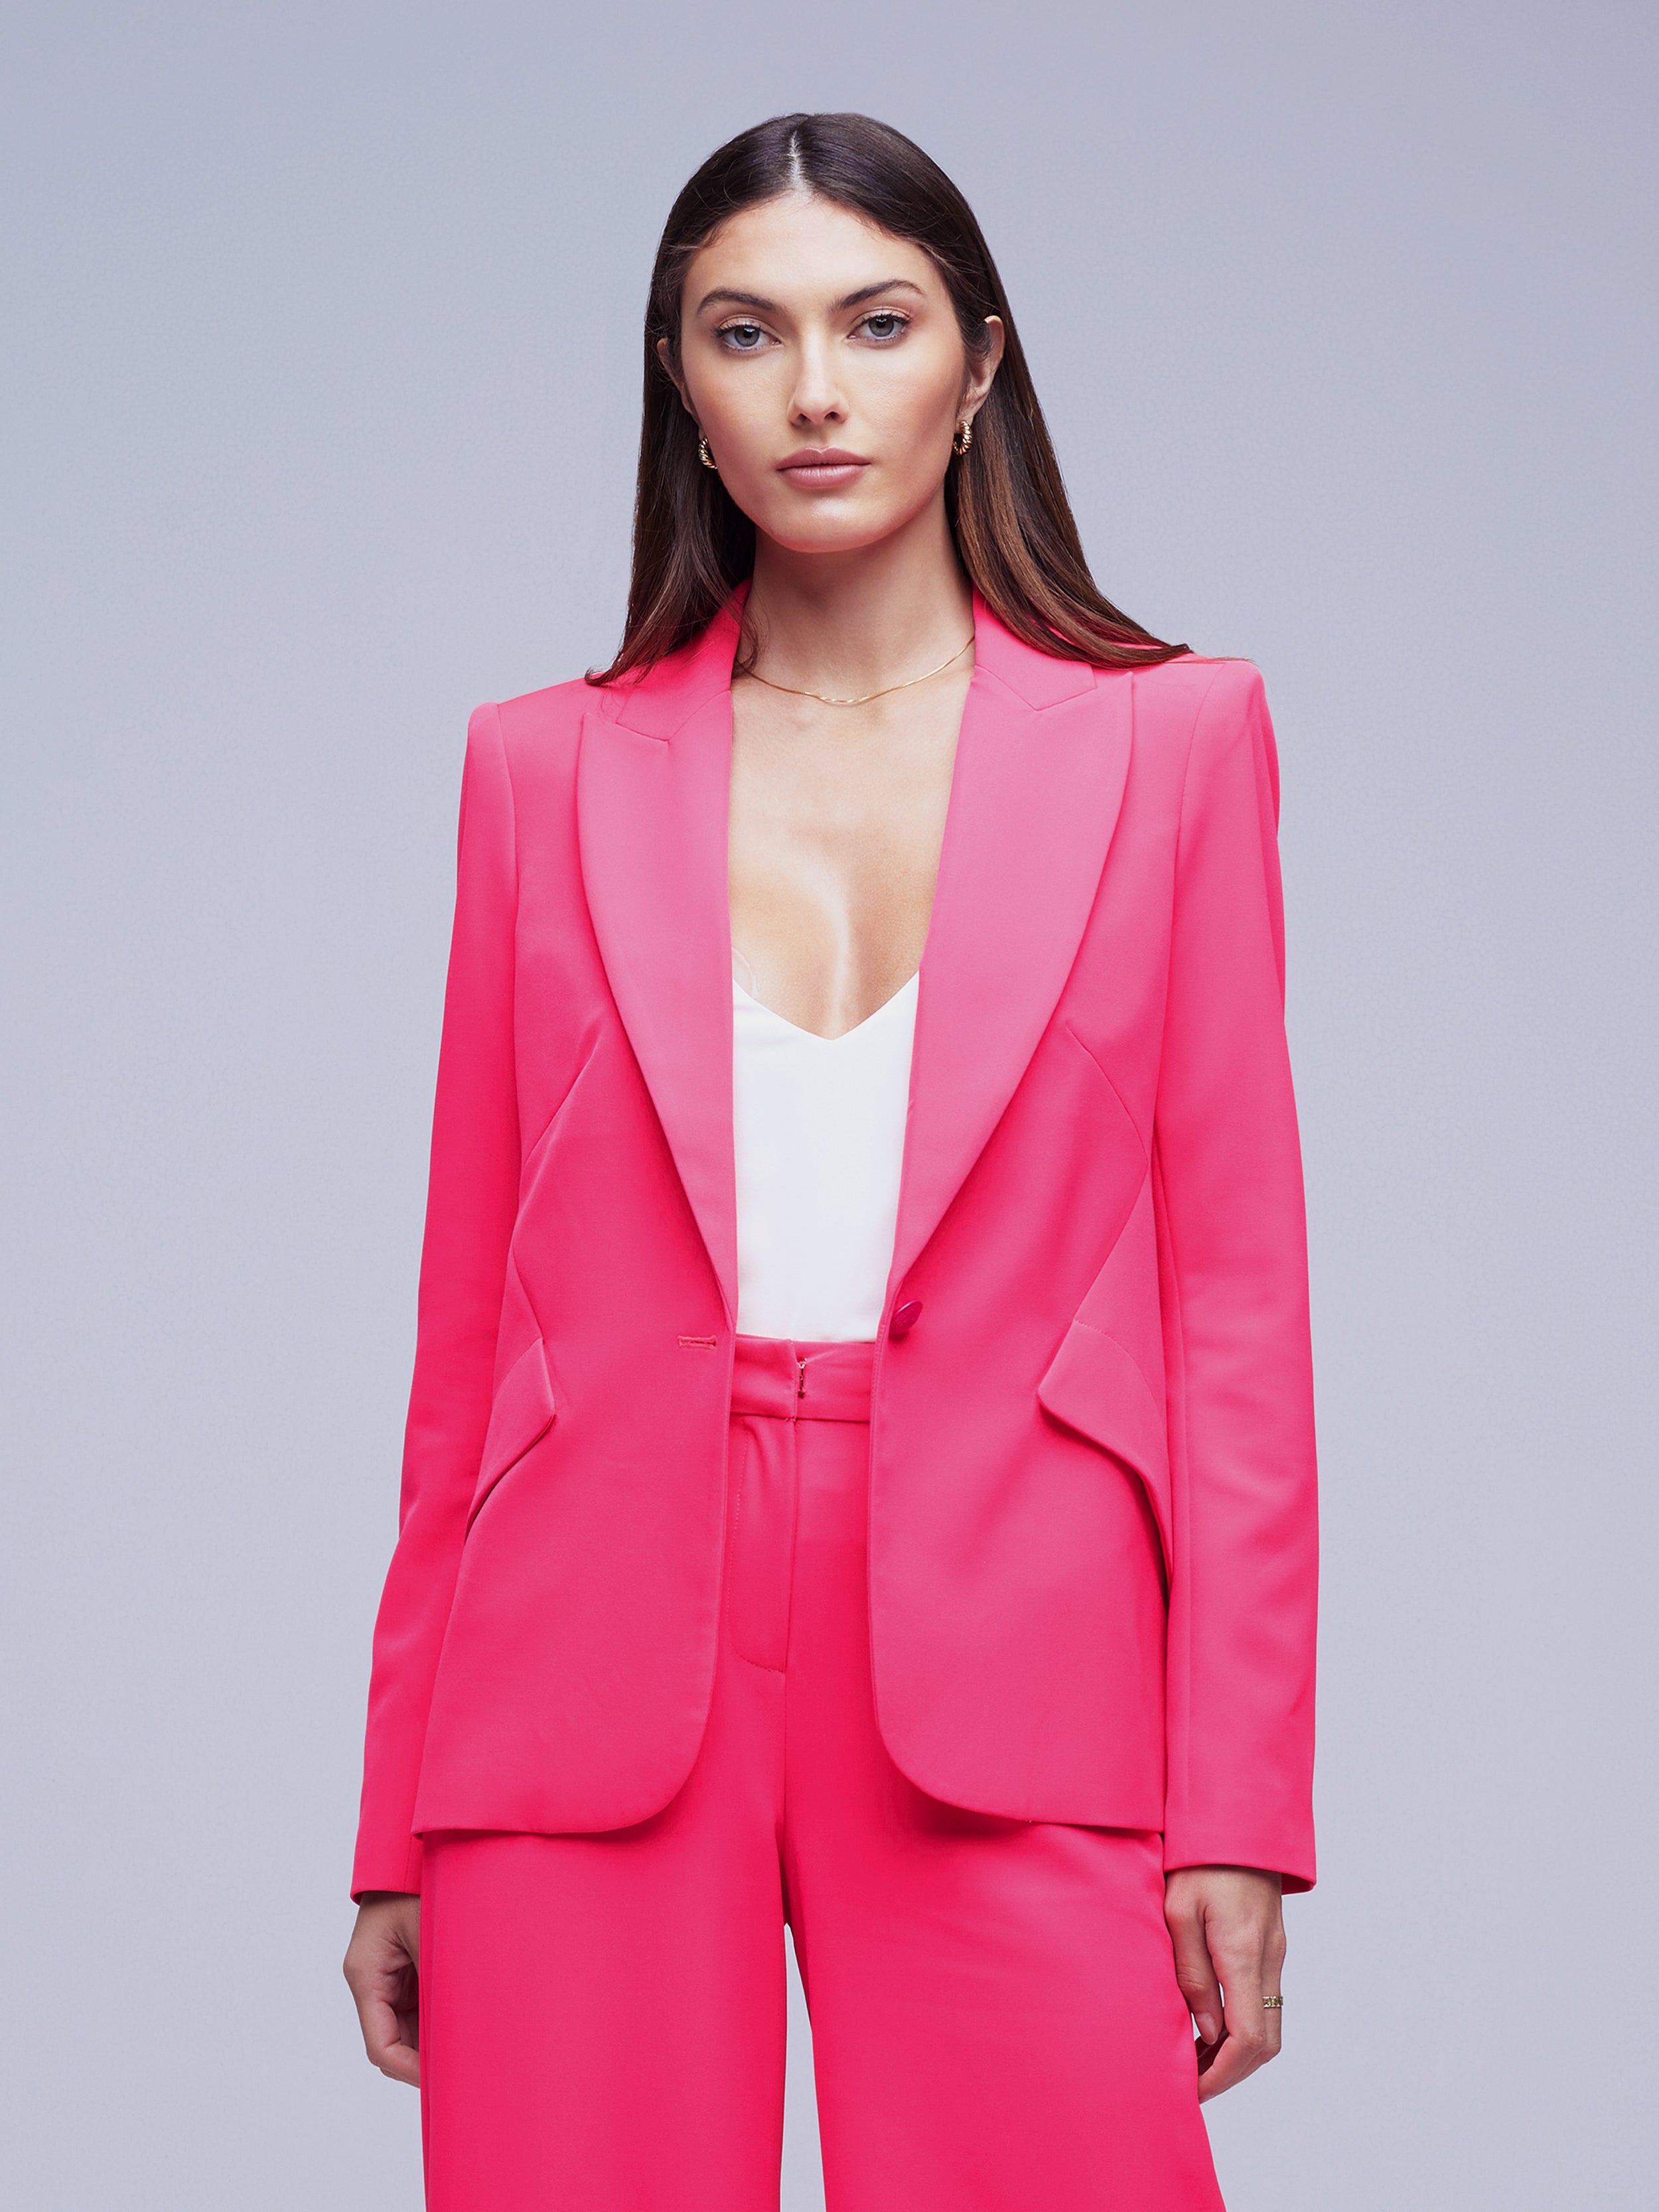 Coral Pink Pants Suit for Women, Office Pant Suit Set Women, Blazer Suit  Set Women, High Waist Straight Pants, Blazer and Trousers Women -   Canada